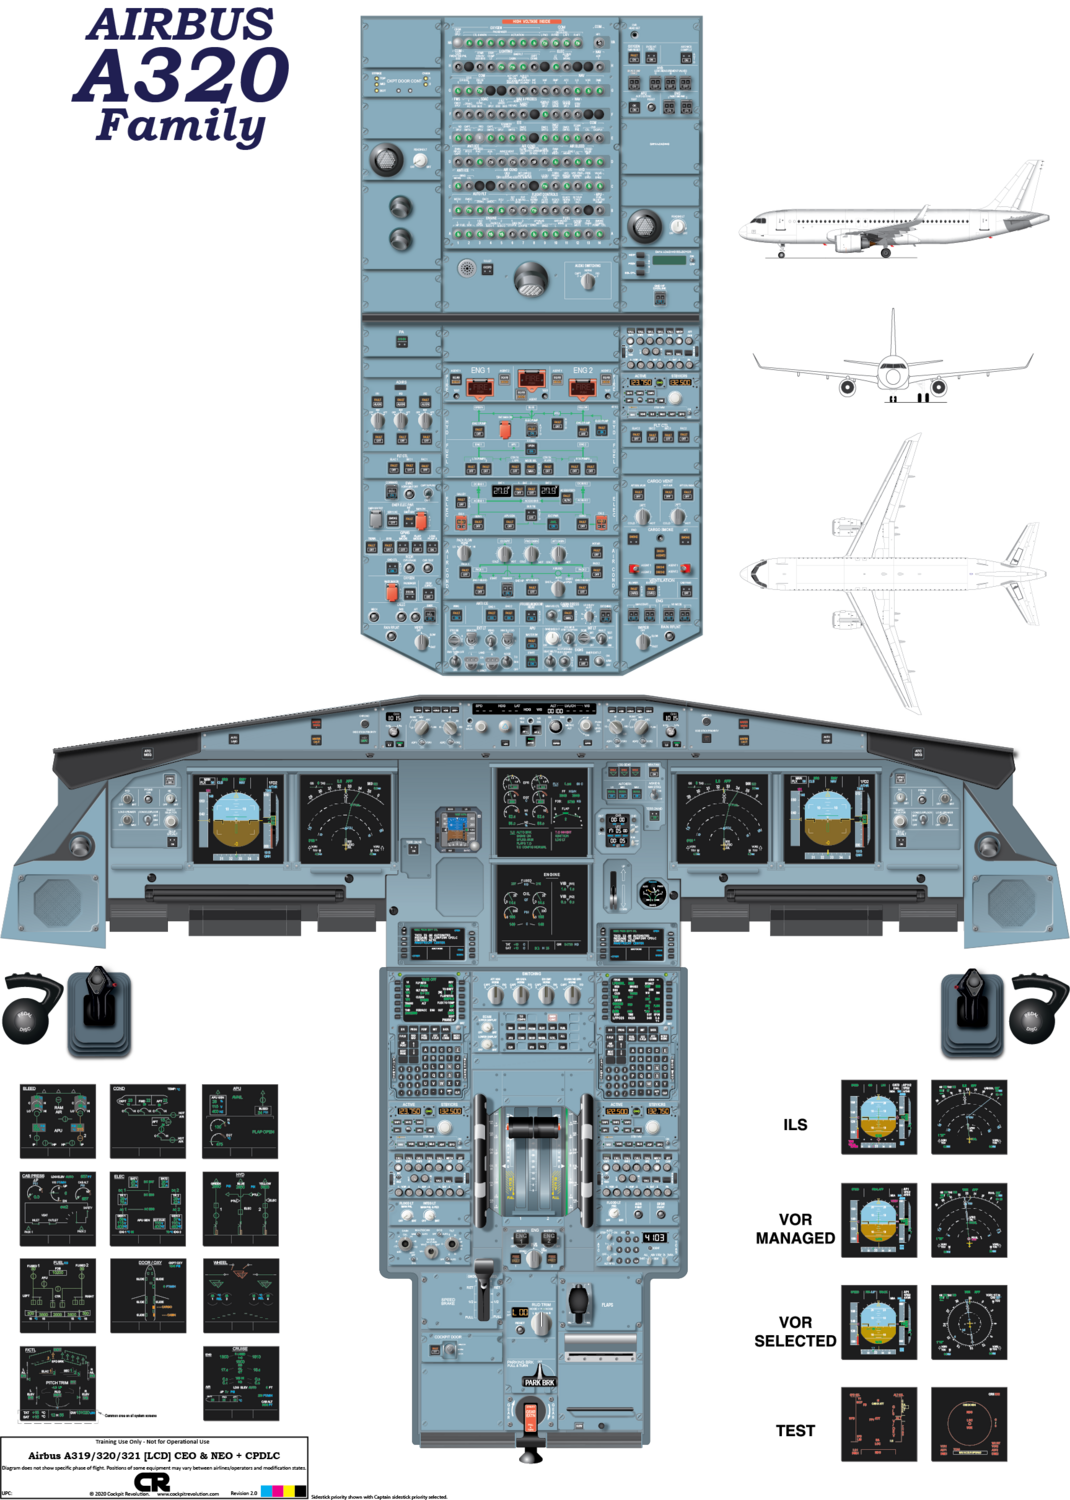 Airbus A320 (CEO v2 & NEO - LCD) Cockpit Poster - Digital Download